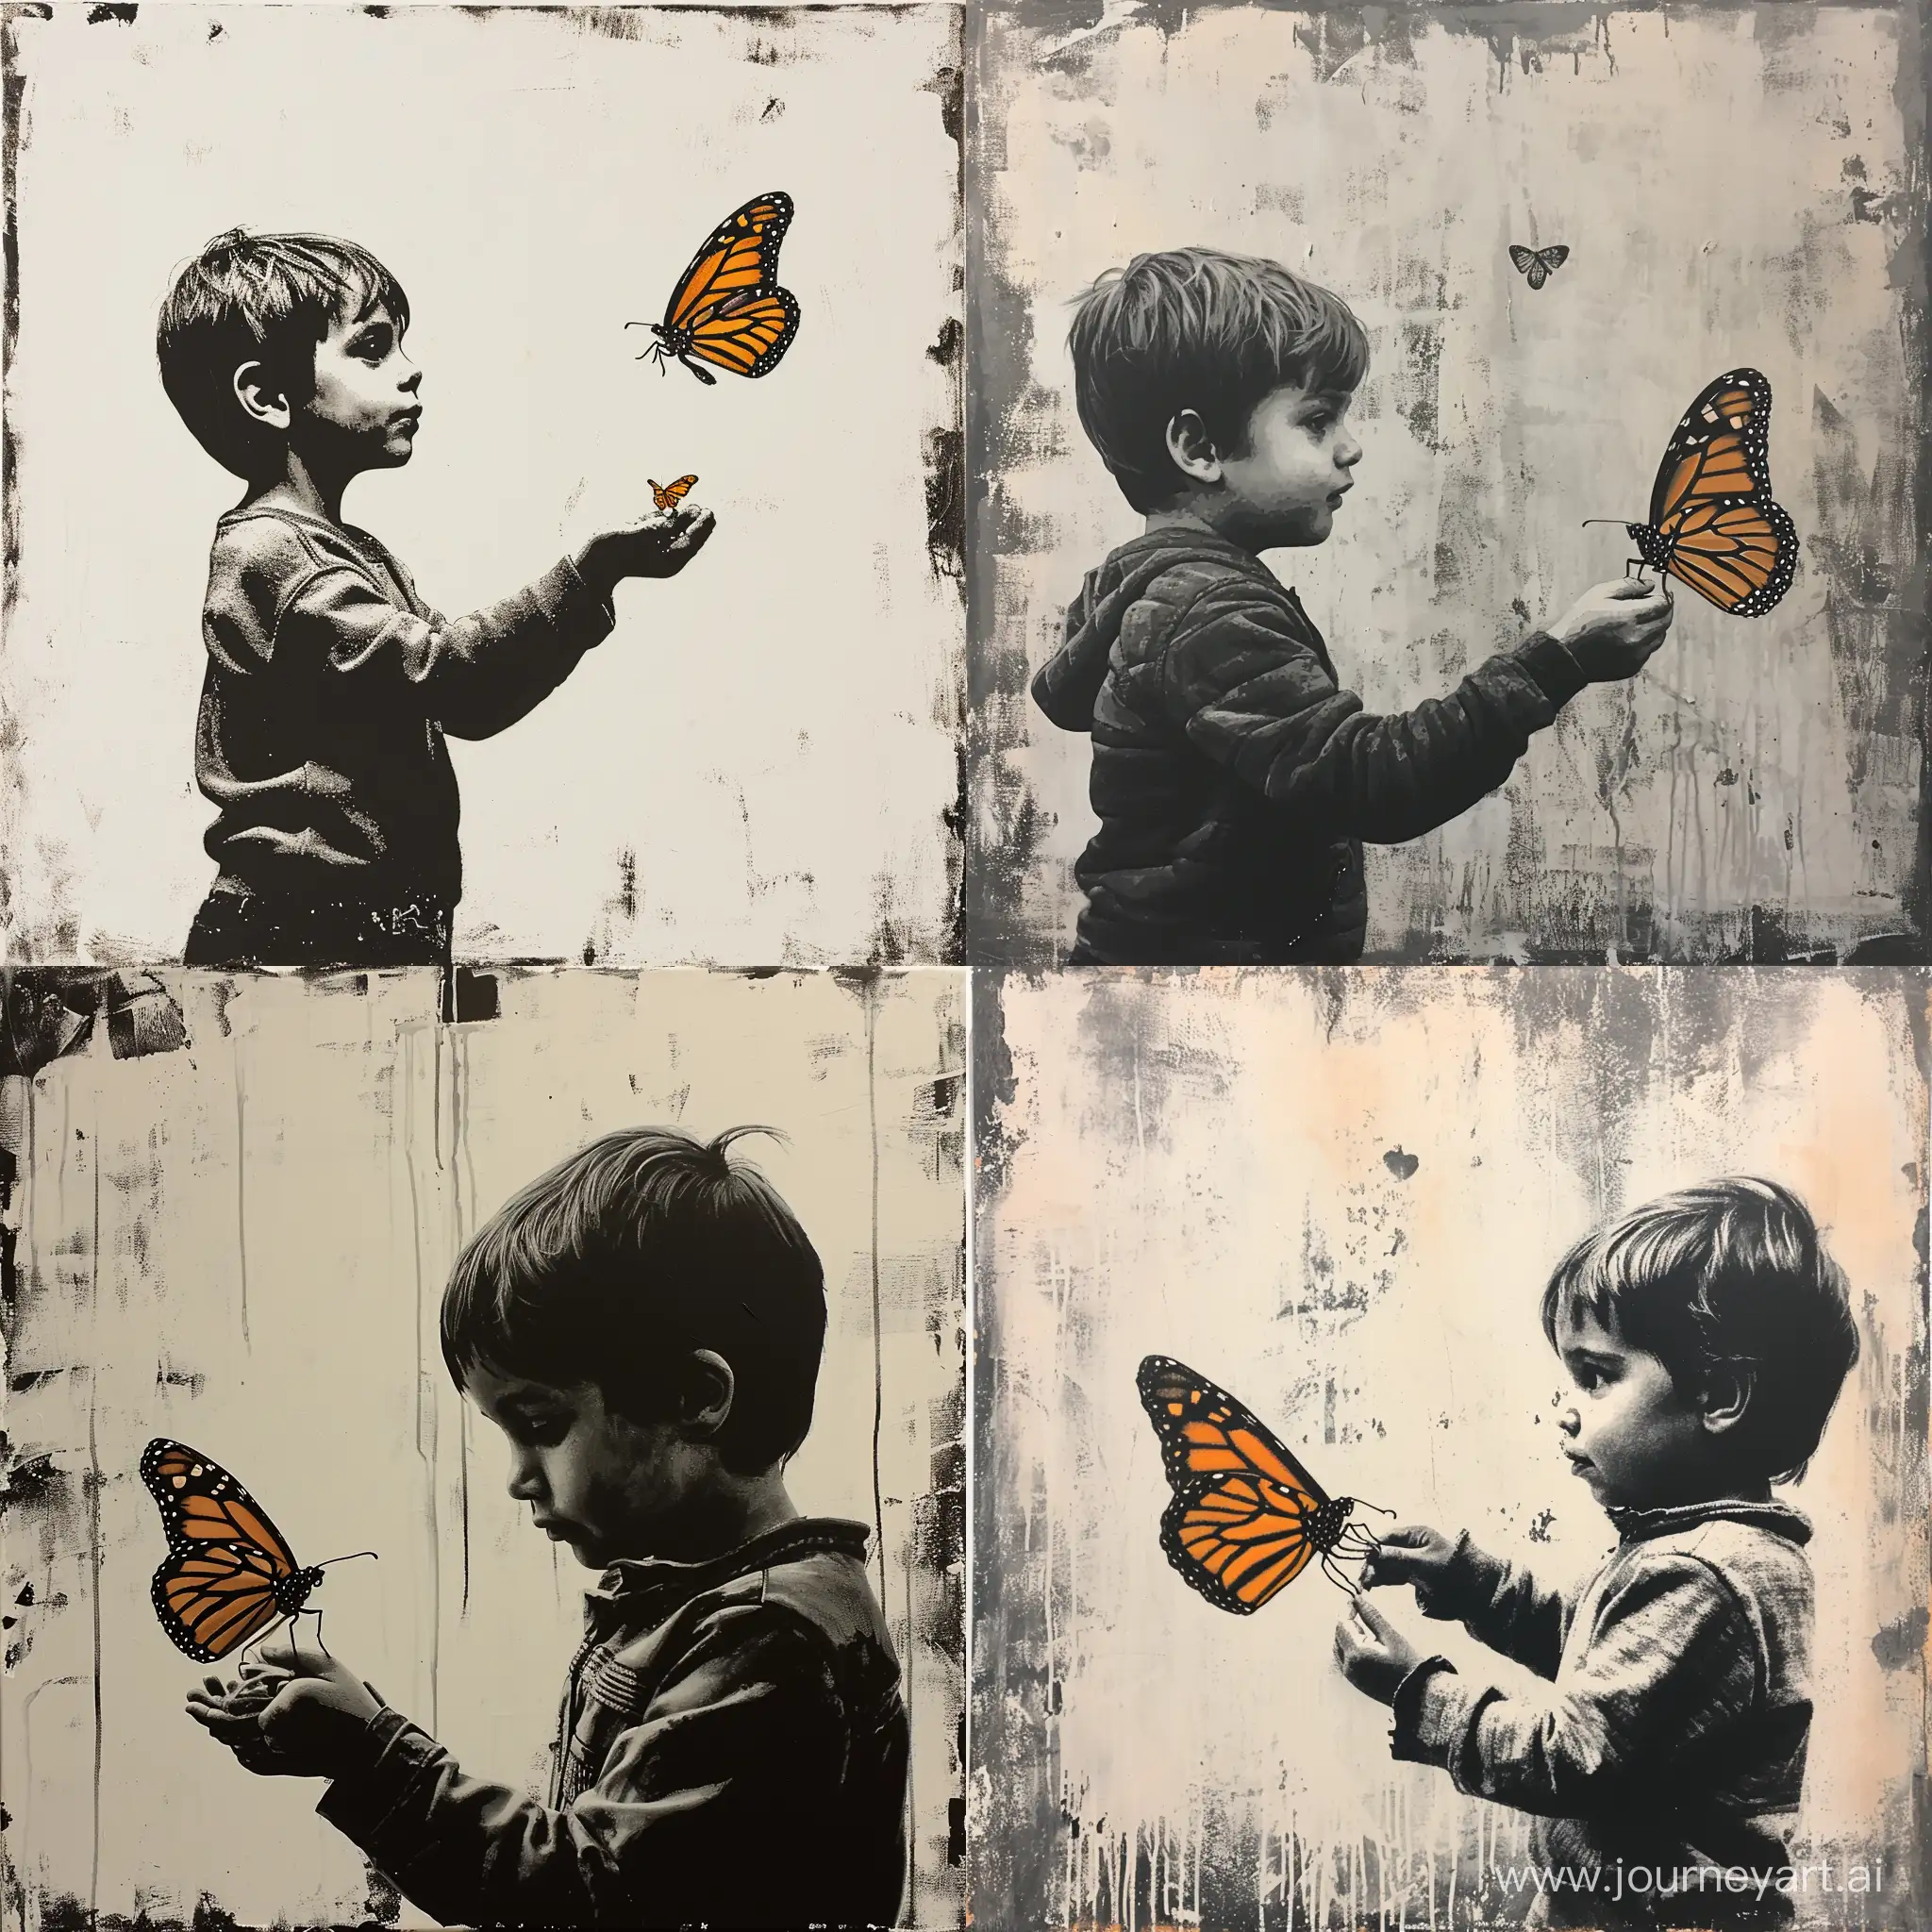 Monochrome-Marvel-12YearOld-Grasping-the-Vibrant-Monarch-Butterfly-in-Banksy-Style